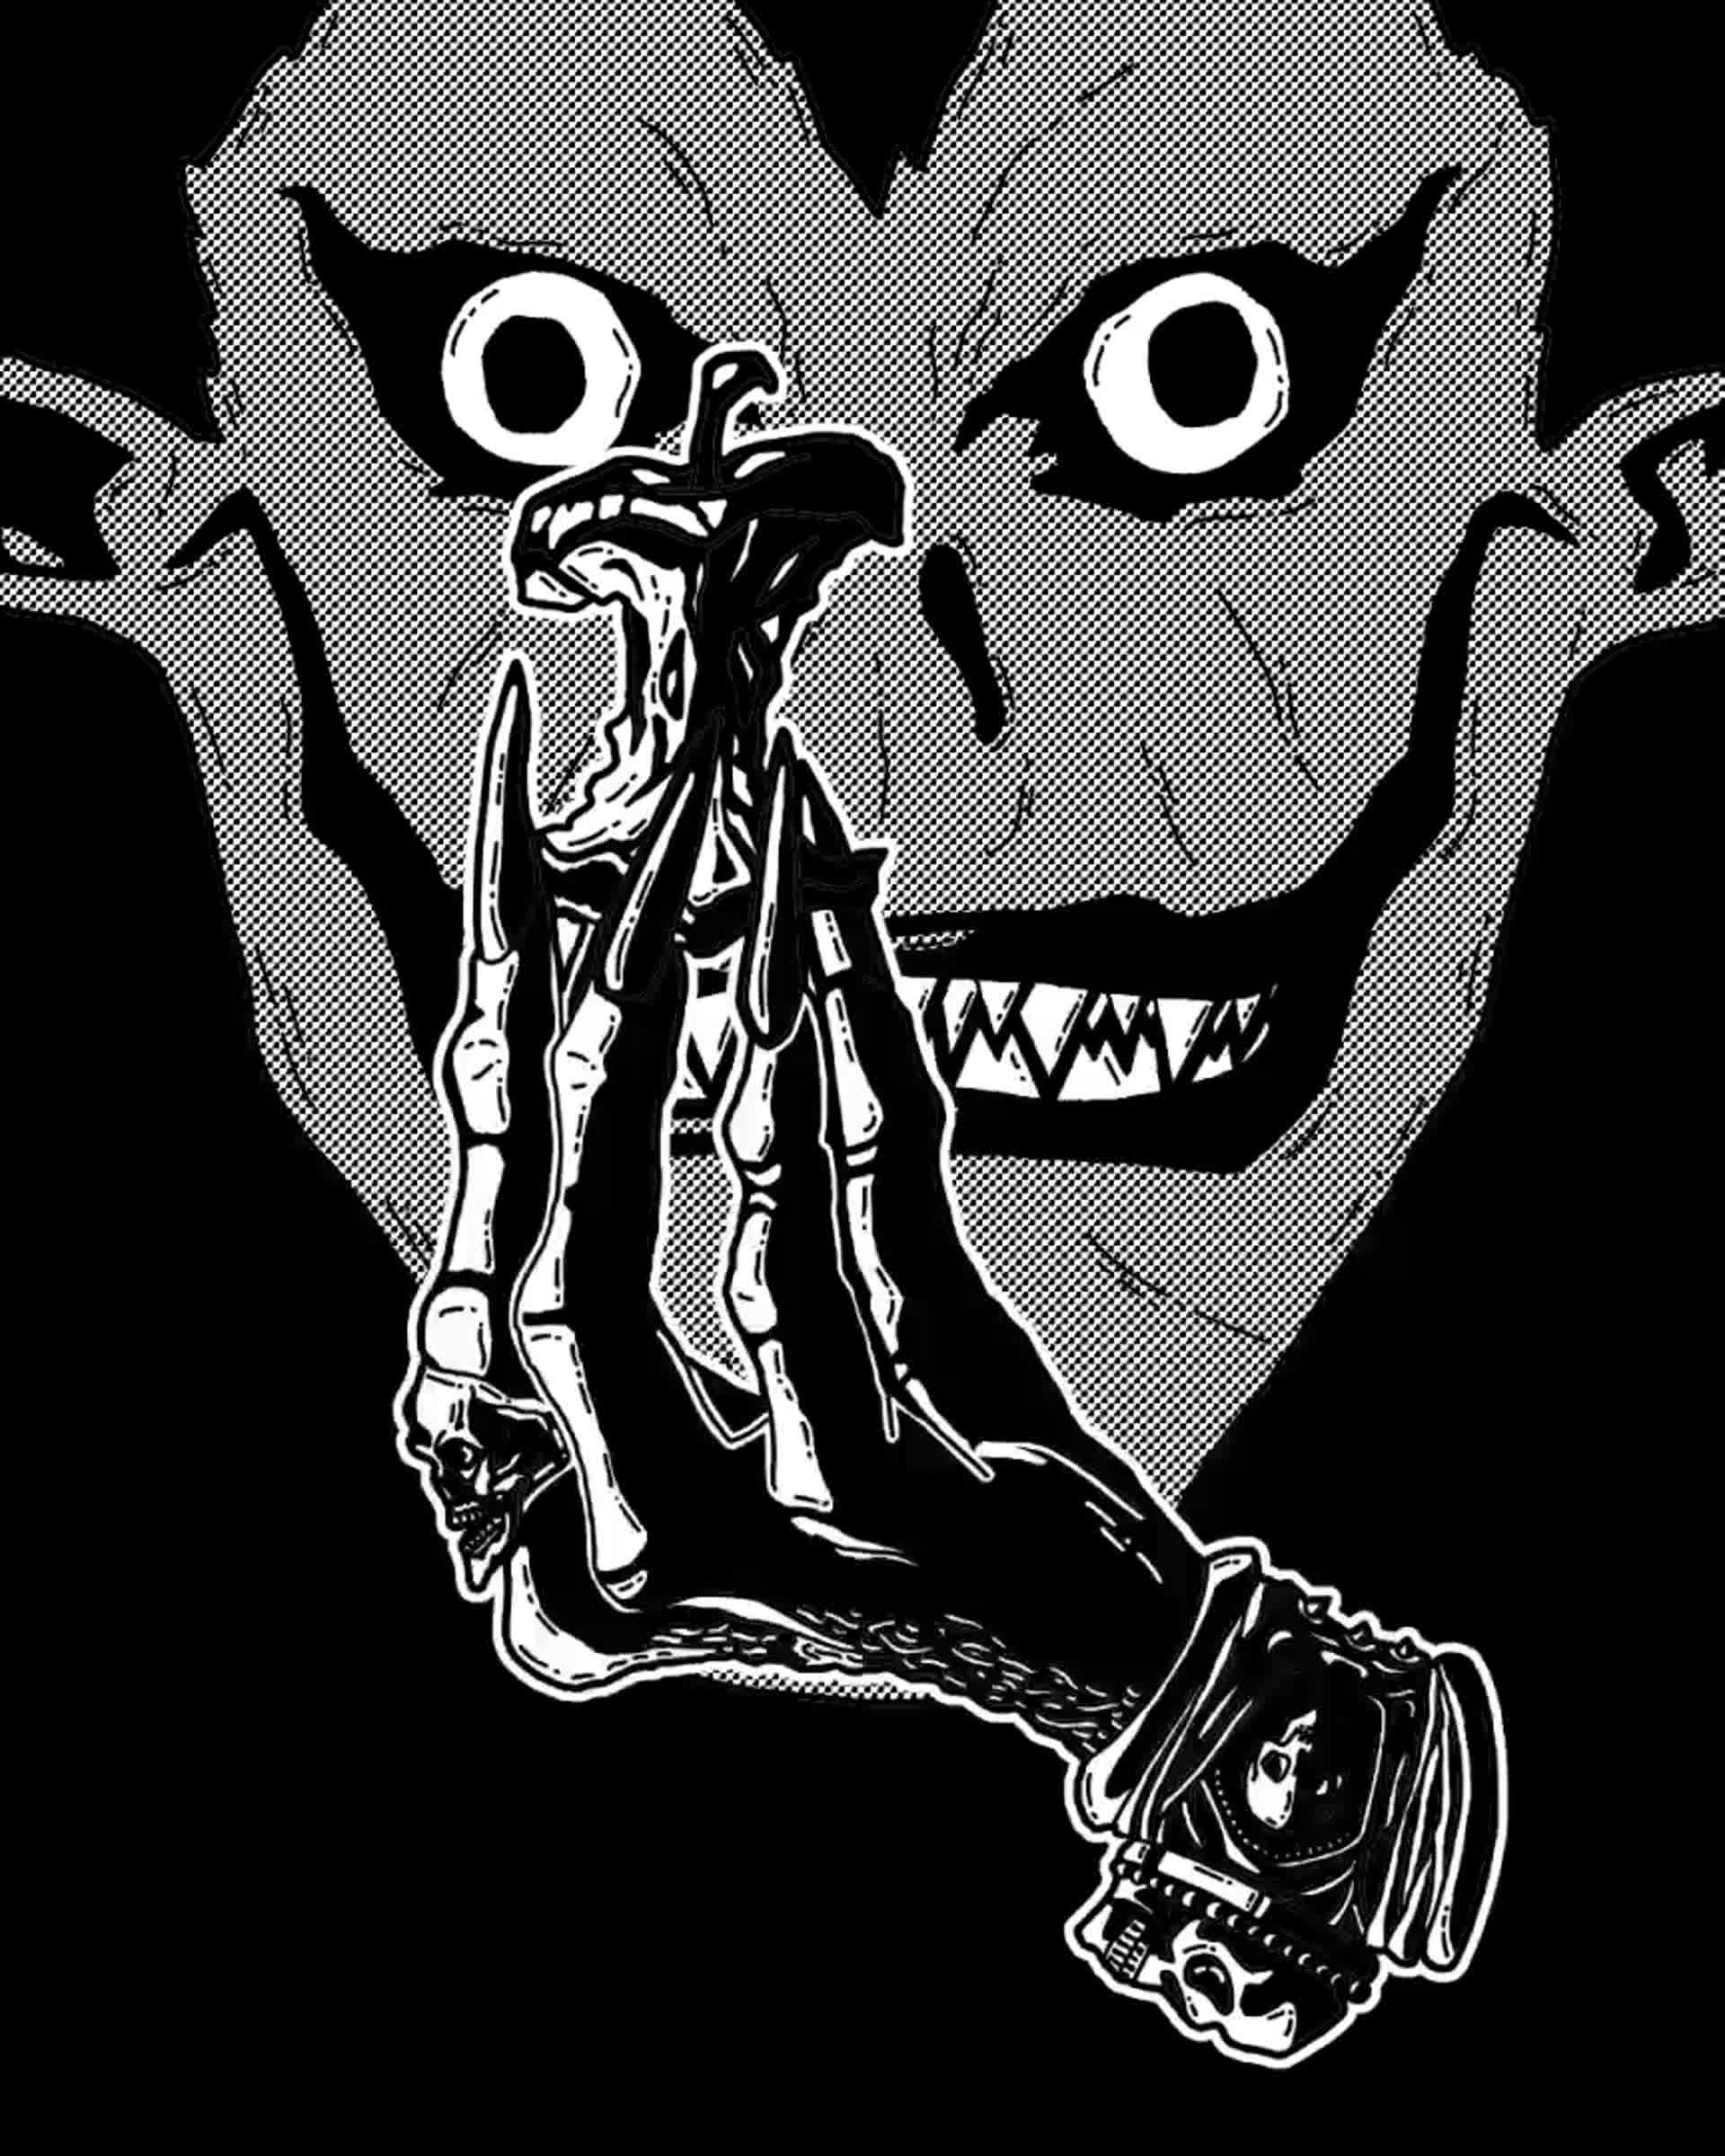 Death Note Ryuk, Ryuk Light Yagami Death Note Drawing, death, manga,  fictional Character png | PNGEgg